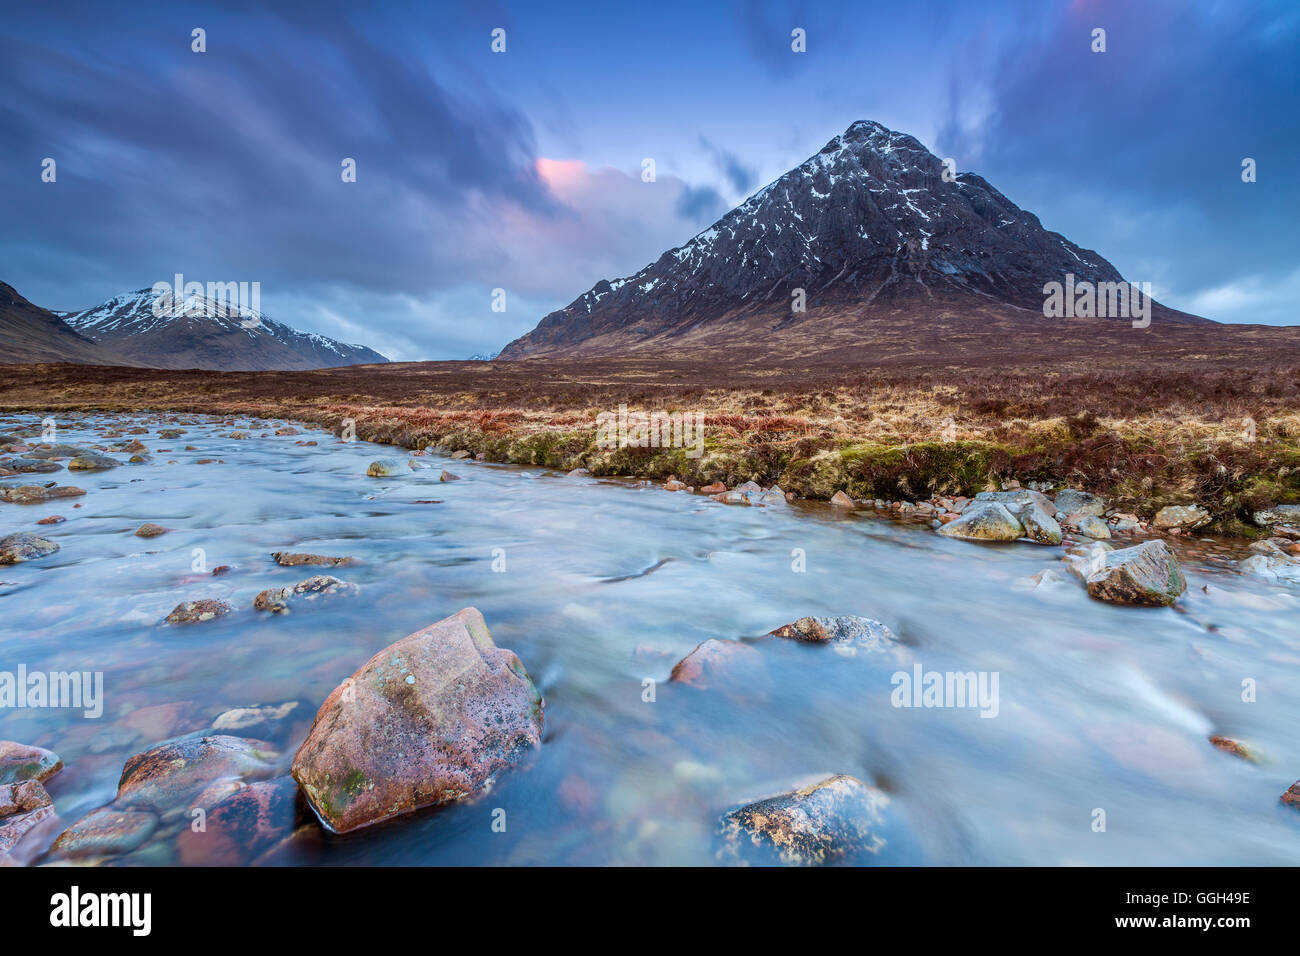 Buachaille Etive Mor and the River Coupall at Glen Etive, Highlands, Scotland, United Kingdom, Europe. Stock Photo